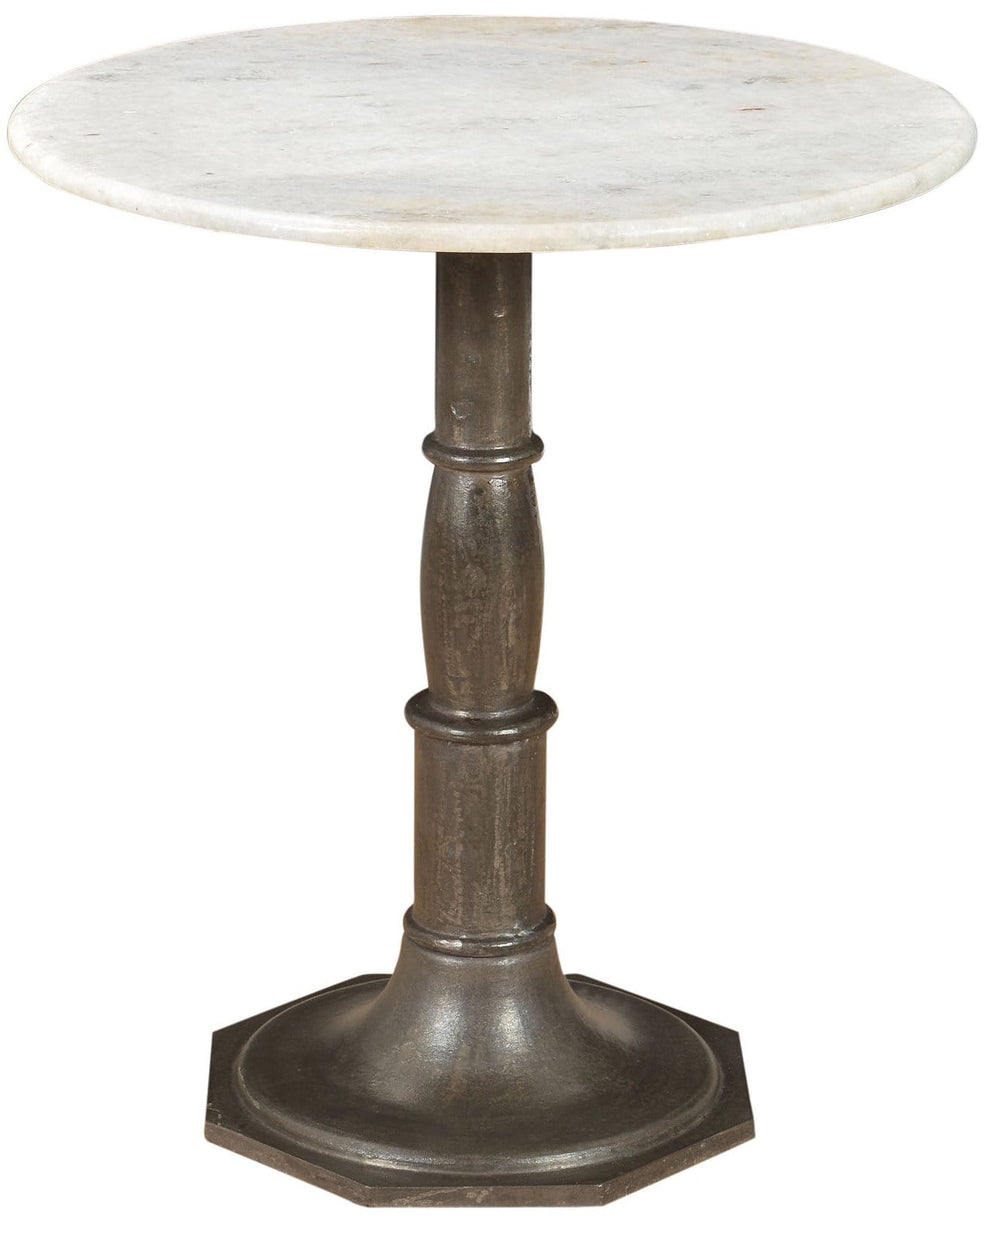 Lucy Side Table, Carbon Wash - Furniture - Accent Tables - High Fashion Home